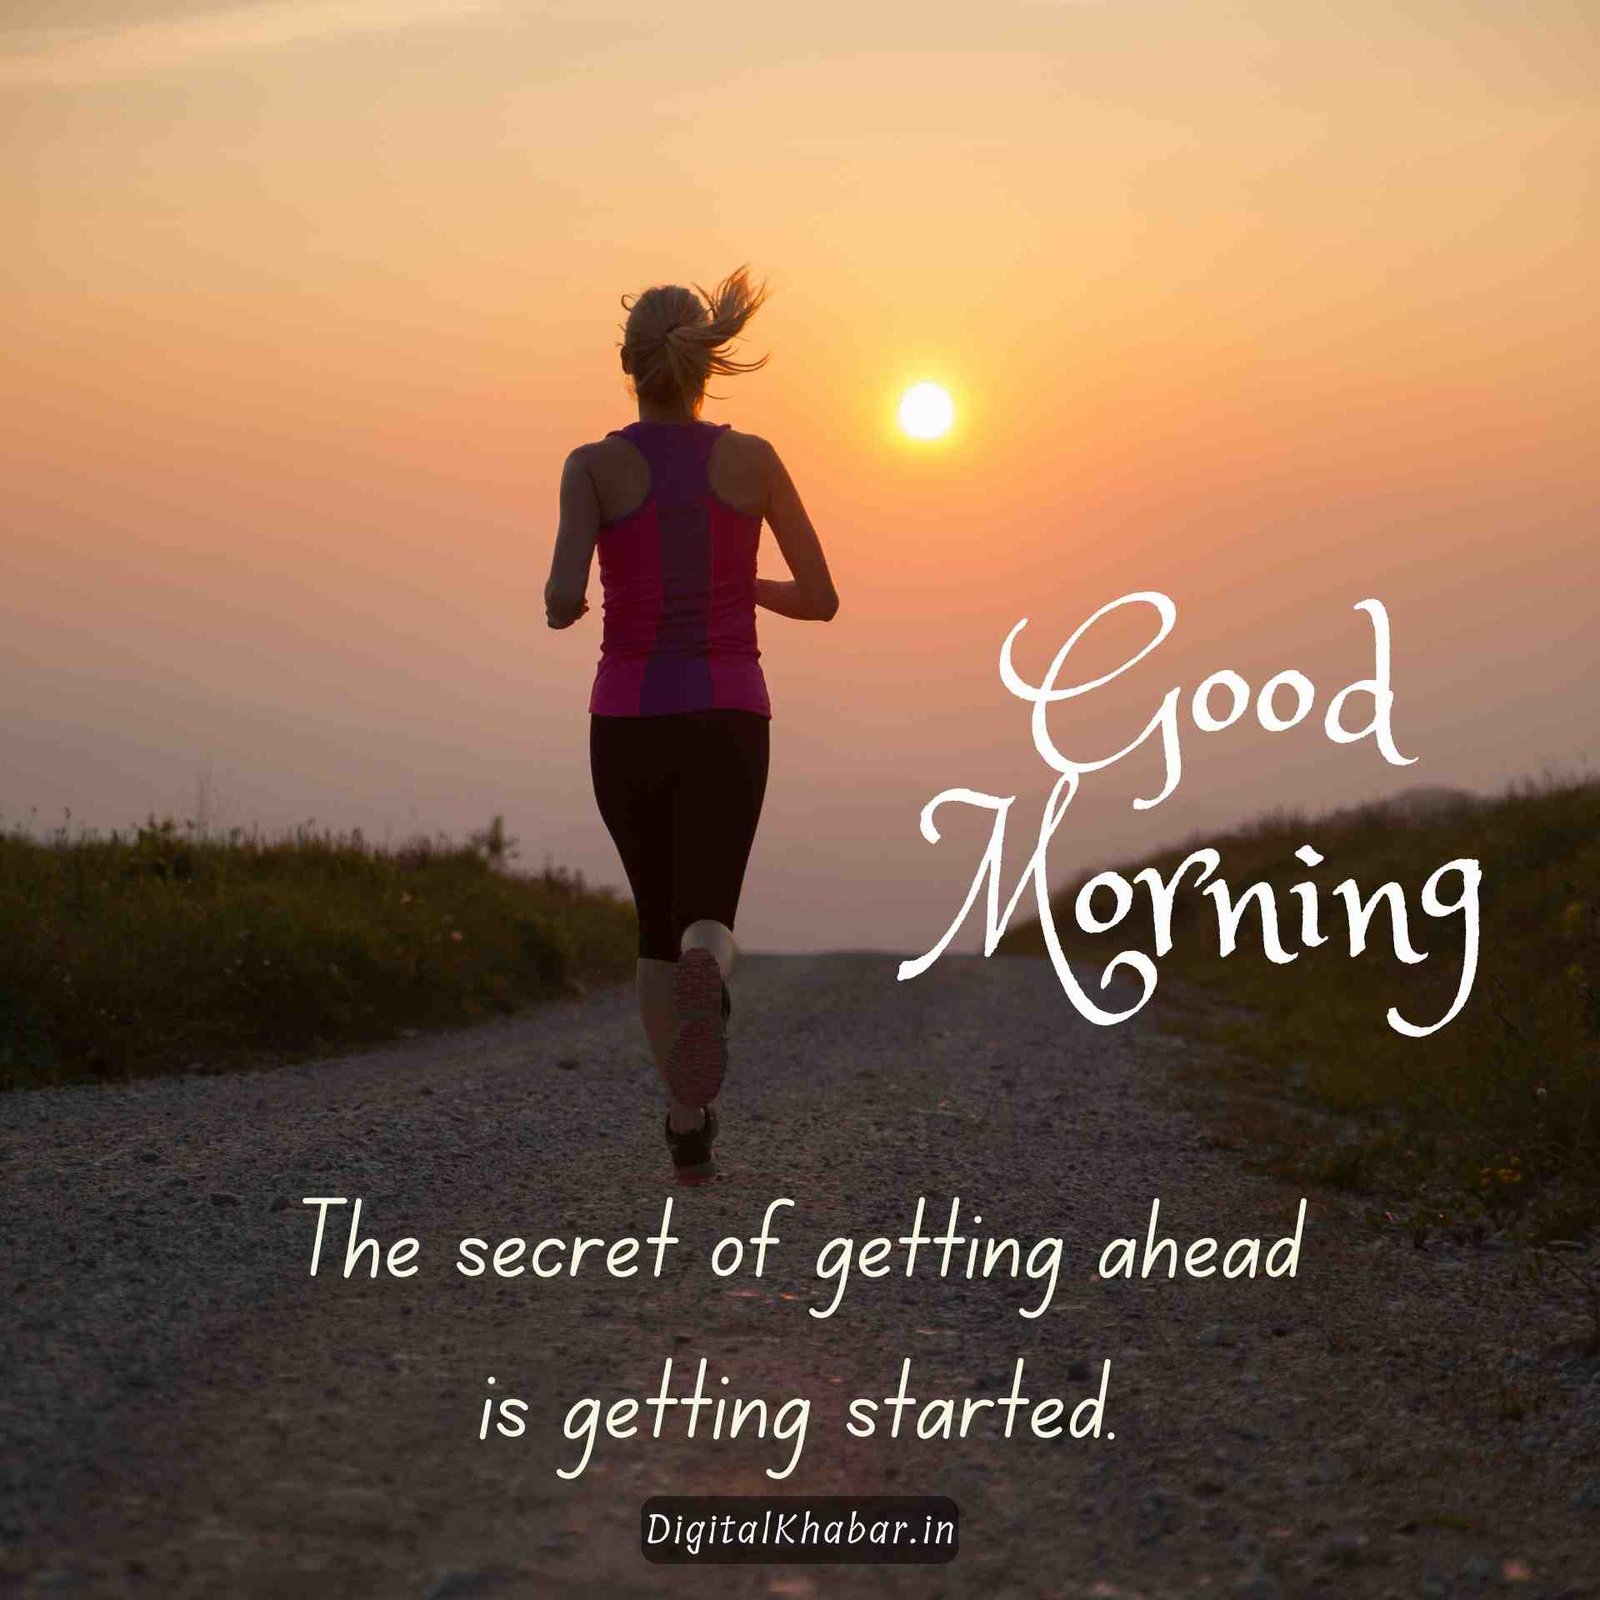 The secret of getting ahead is getting started.Good Morning Dear